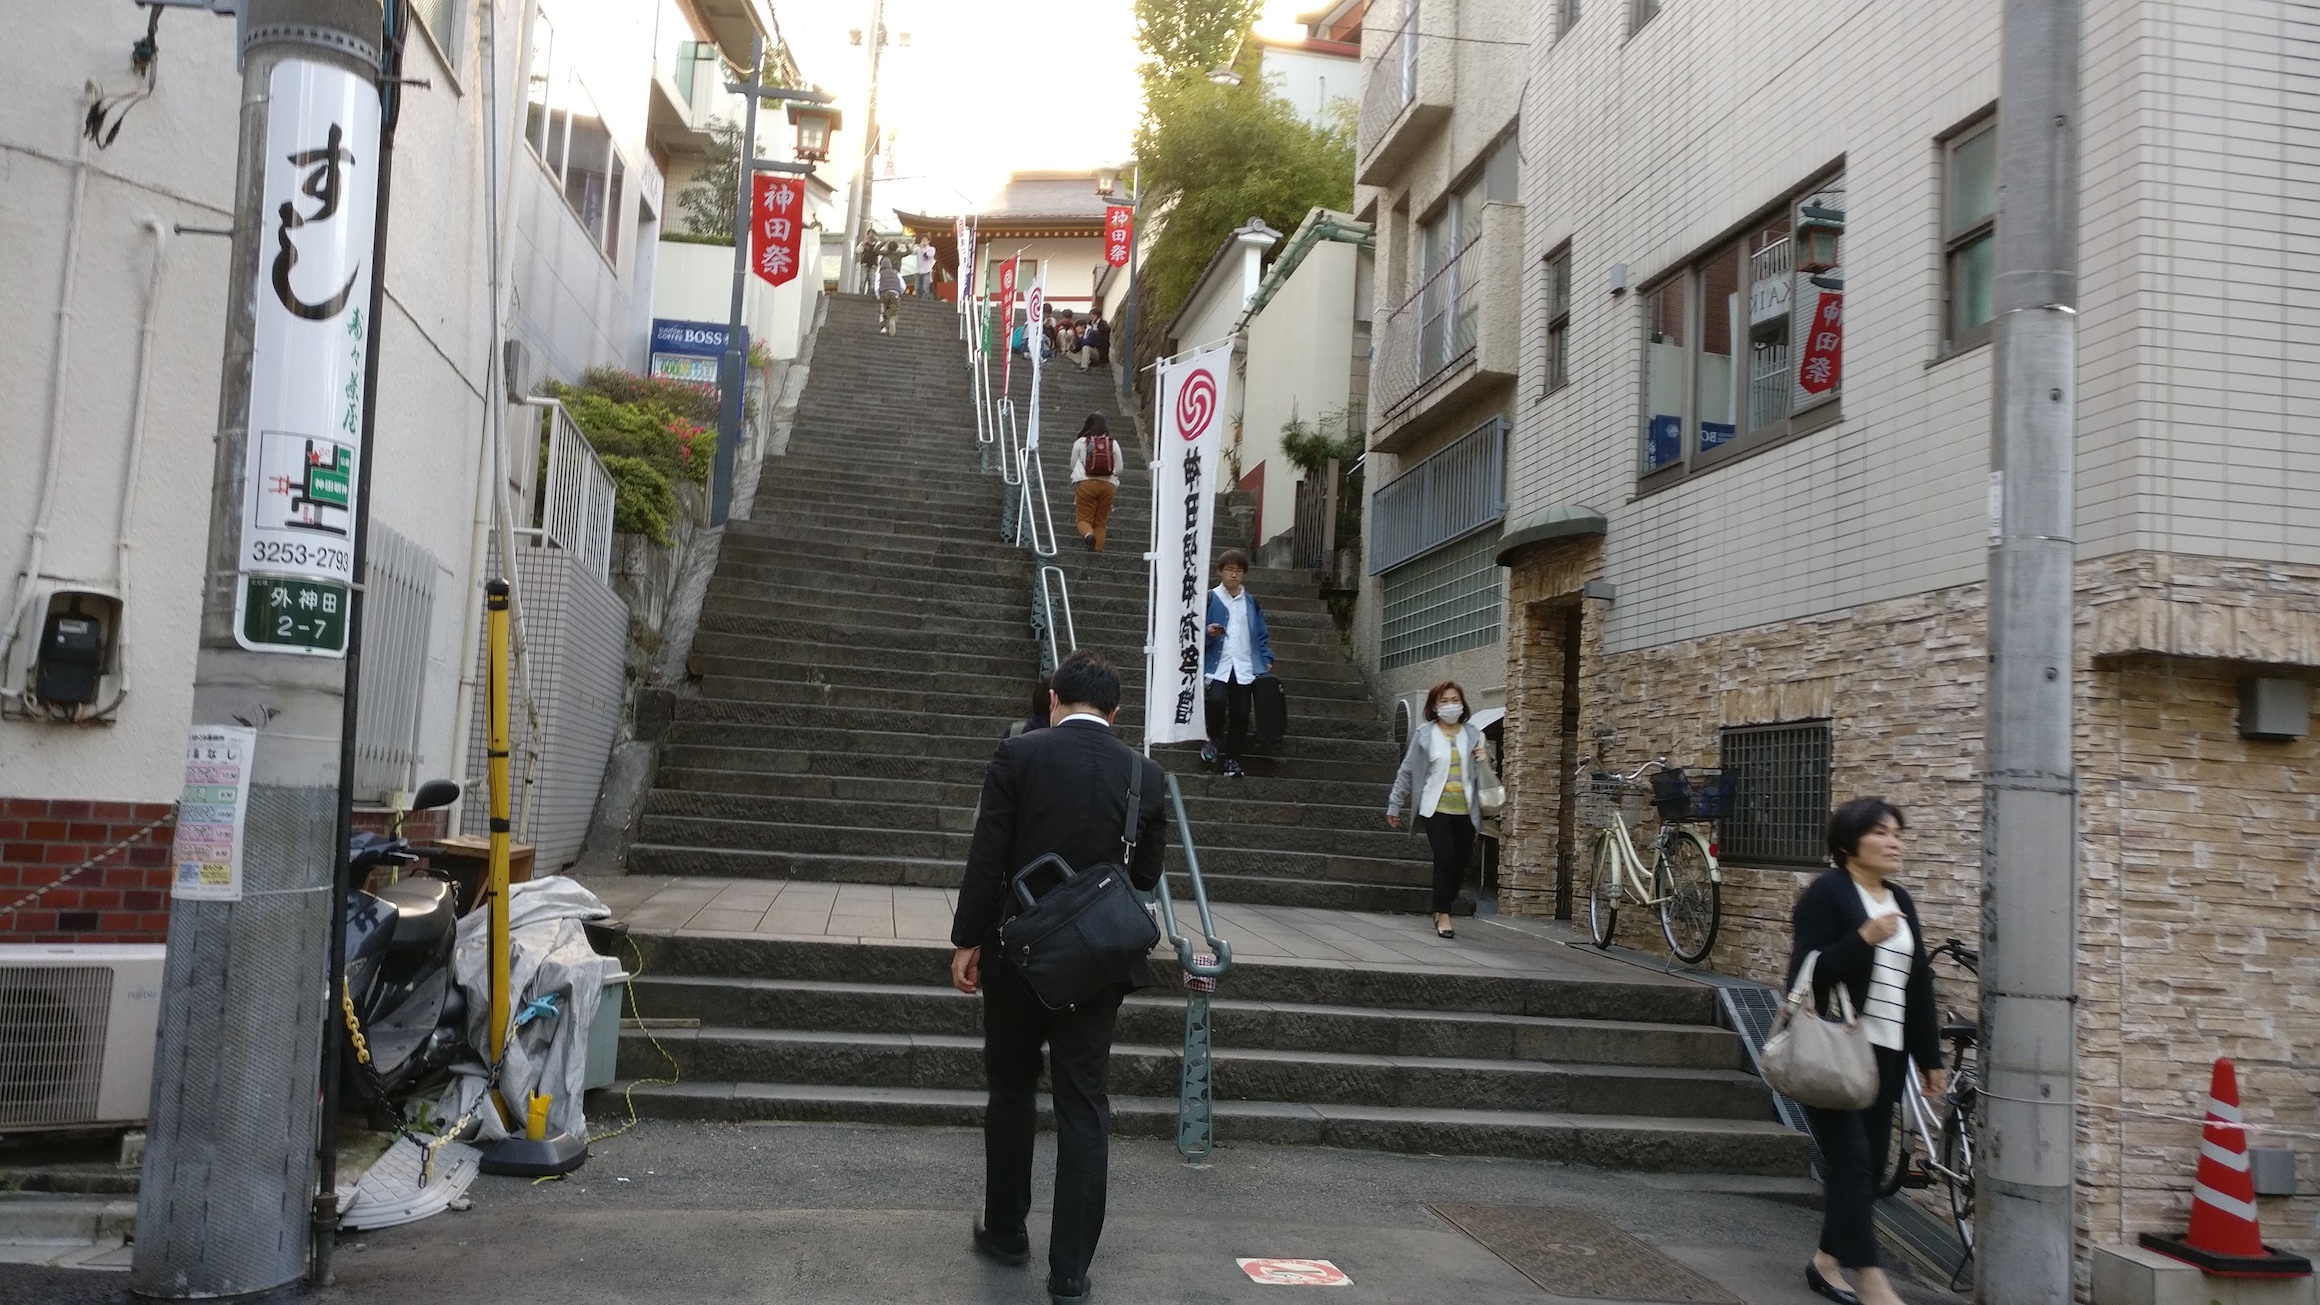 The steps to Kanda Myojin shrine, perfect for some early morning exercise